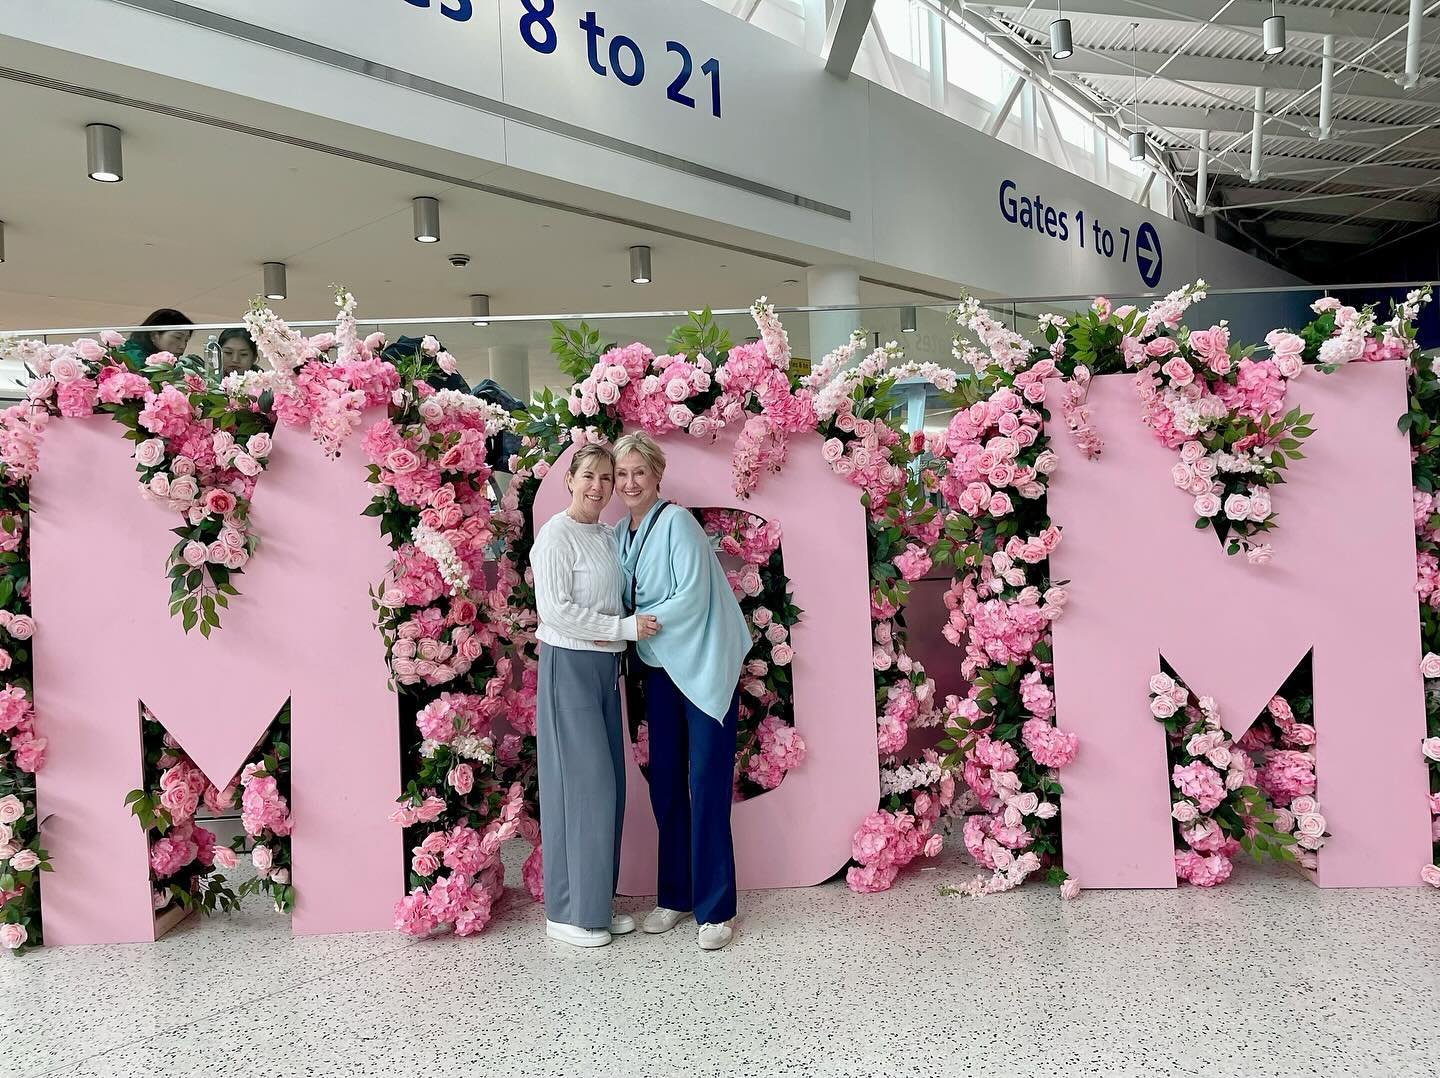 Grateful to have my mom along for a fun filled design sourcing week in NYC, followed by a fantastic Mother&rsquo;s Day celebration with family. Headed back to Florida with a full heart and loads of inspiration. Happy Mother&rsquo;s Day to all the bad